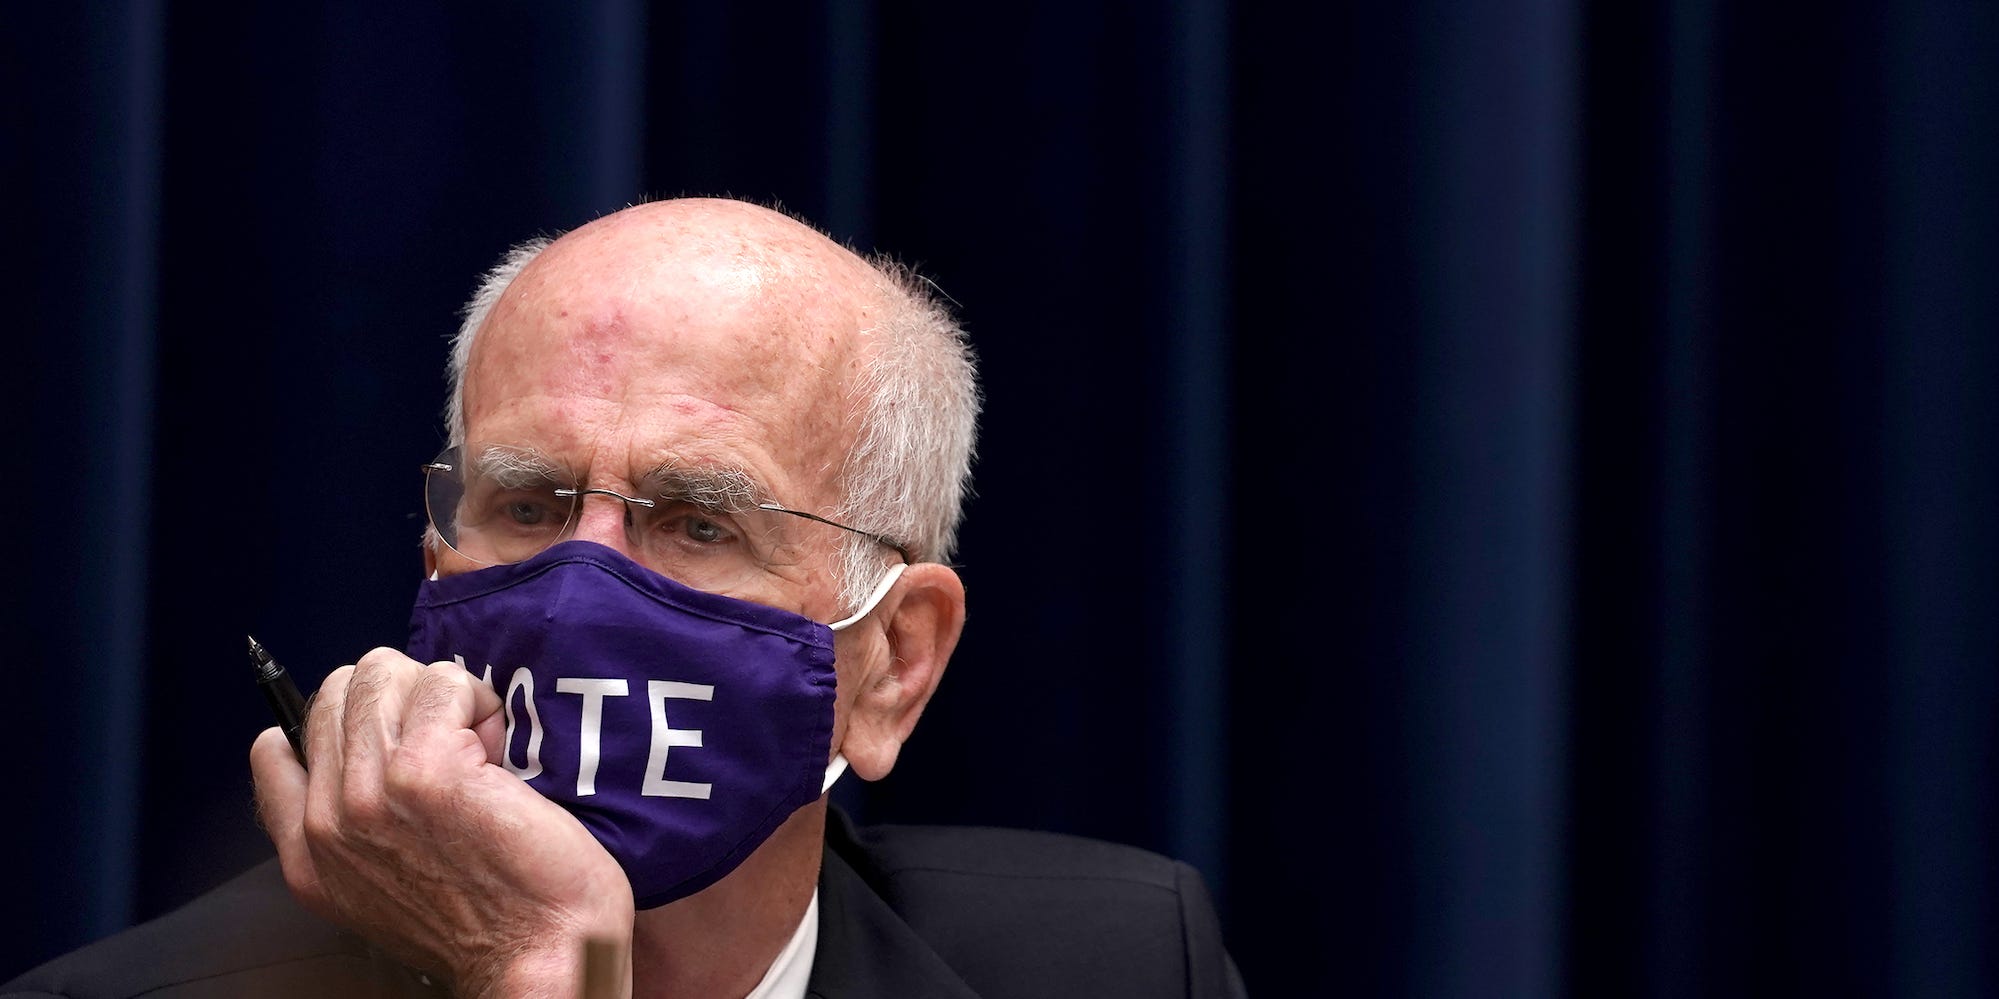 Rep. Peter Welch at a House Oversight Committee hearing on September 30, 2020.